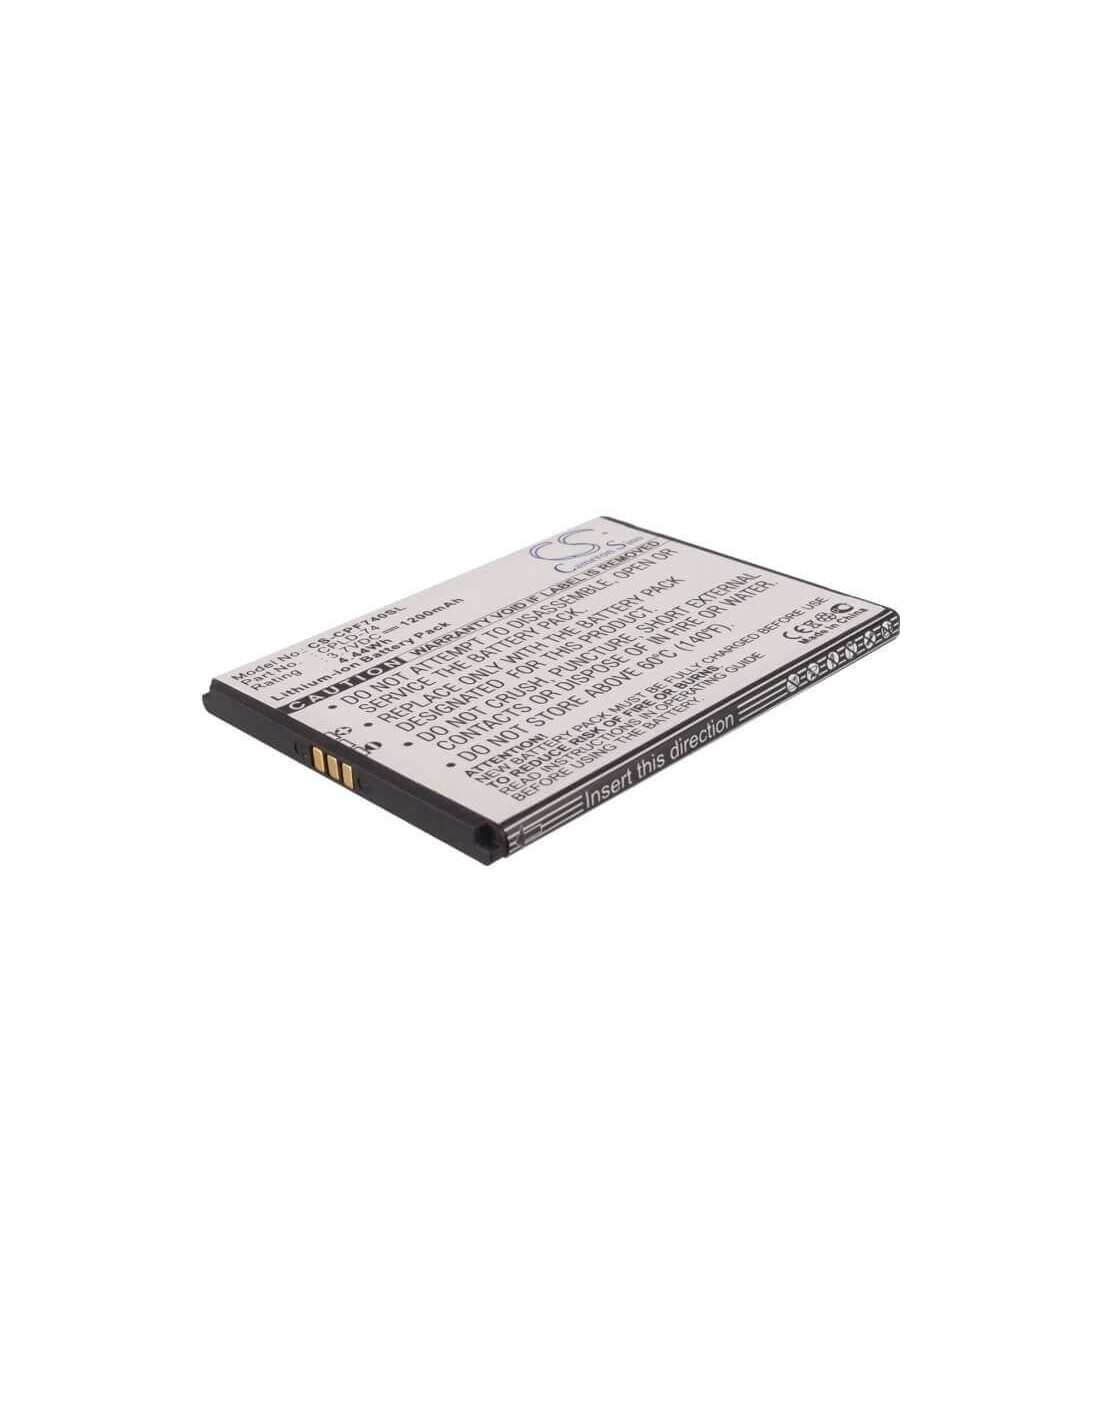 Battery for Coolpad 5860e 3.7V, 1200mAh - 4.44Wh